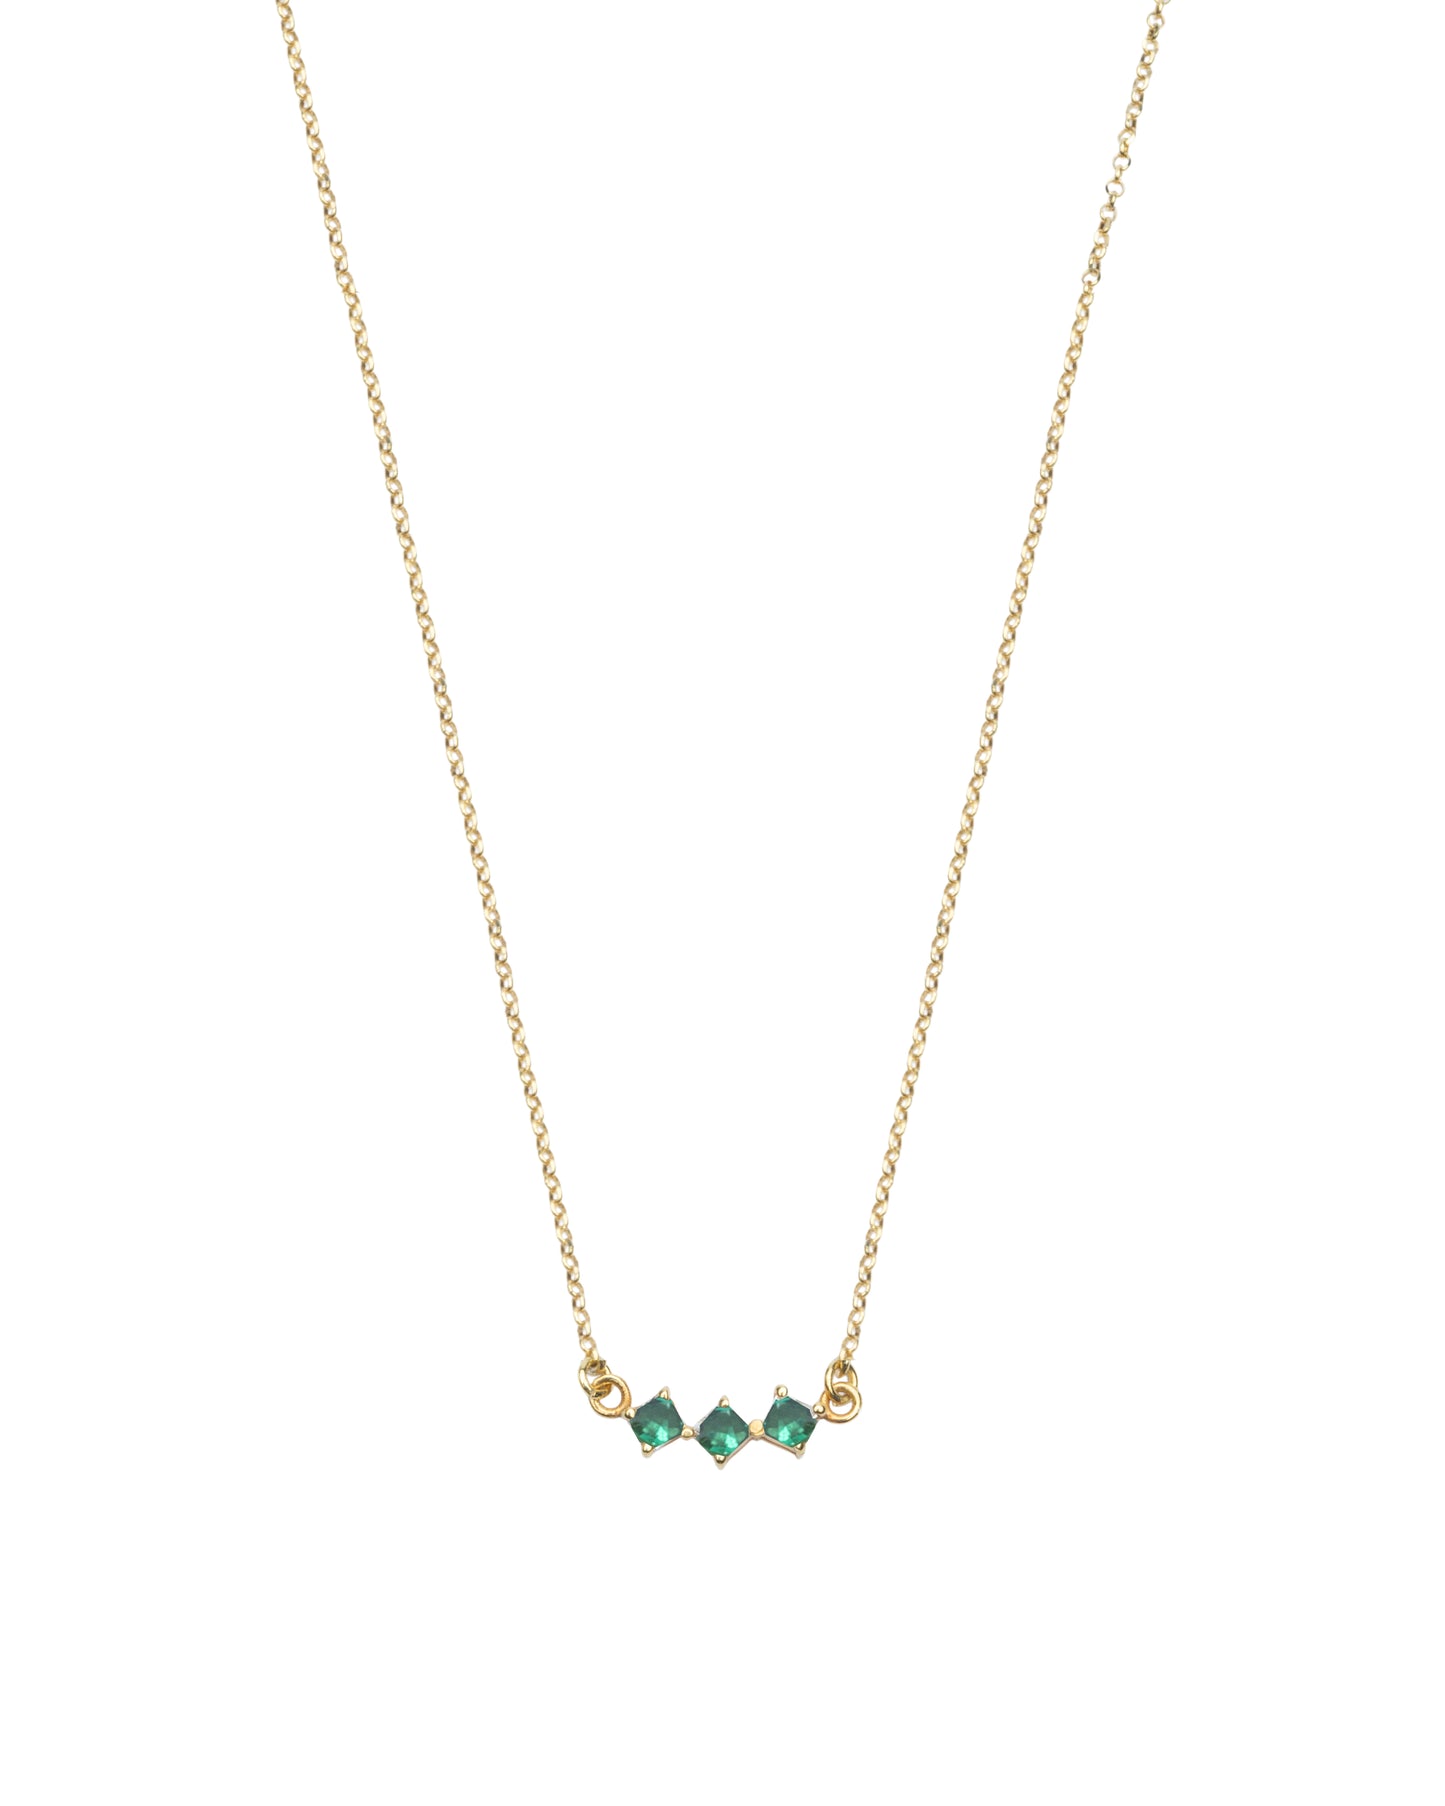 Emerald Little Rhombus Necklace - Gold Plated